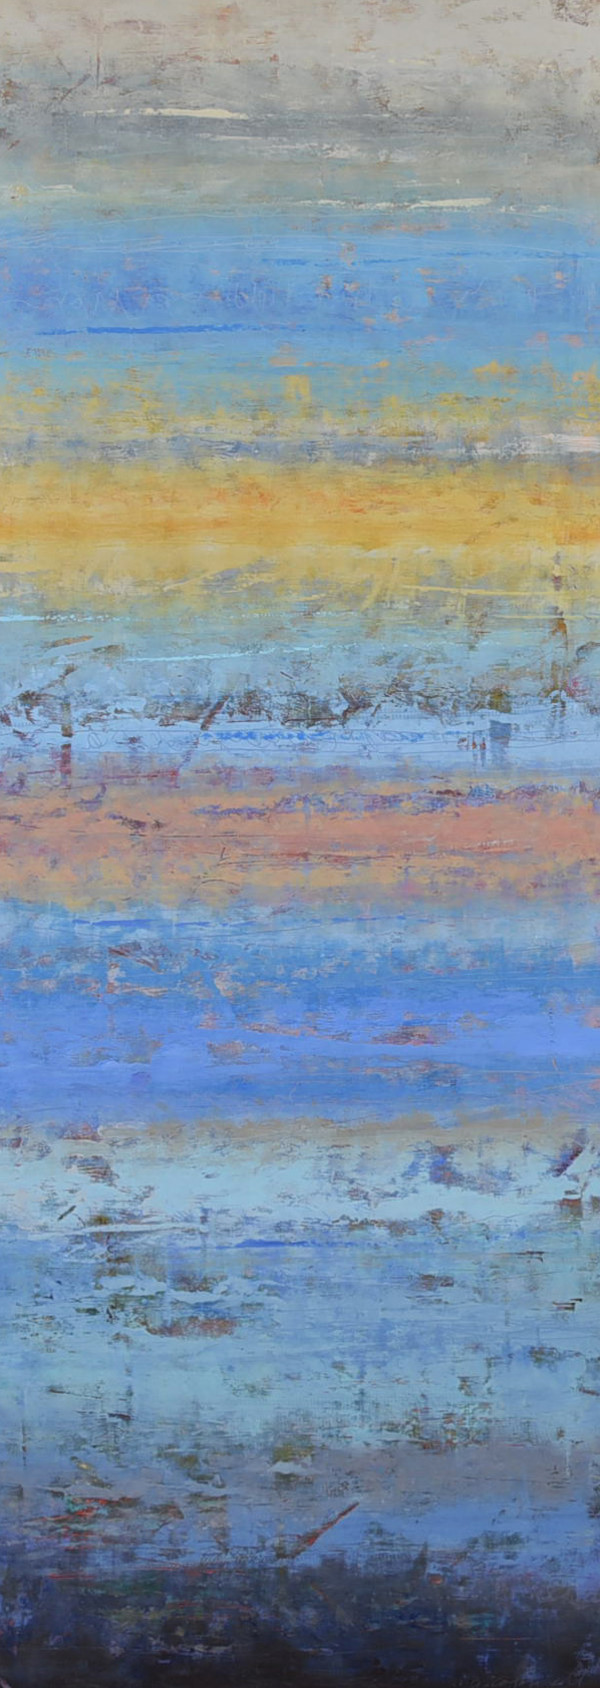 Morning Quiet, 60x22" by Ginnie Cappaert